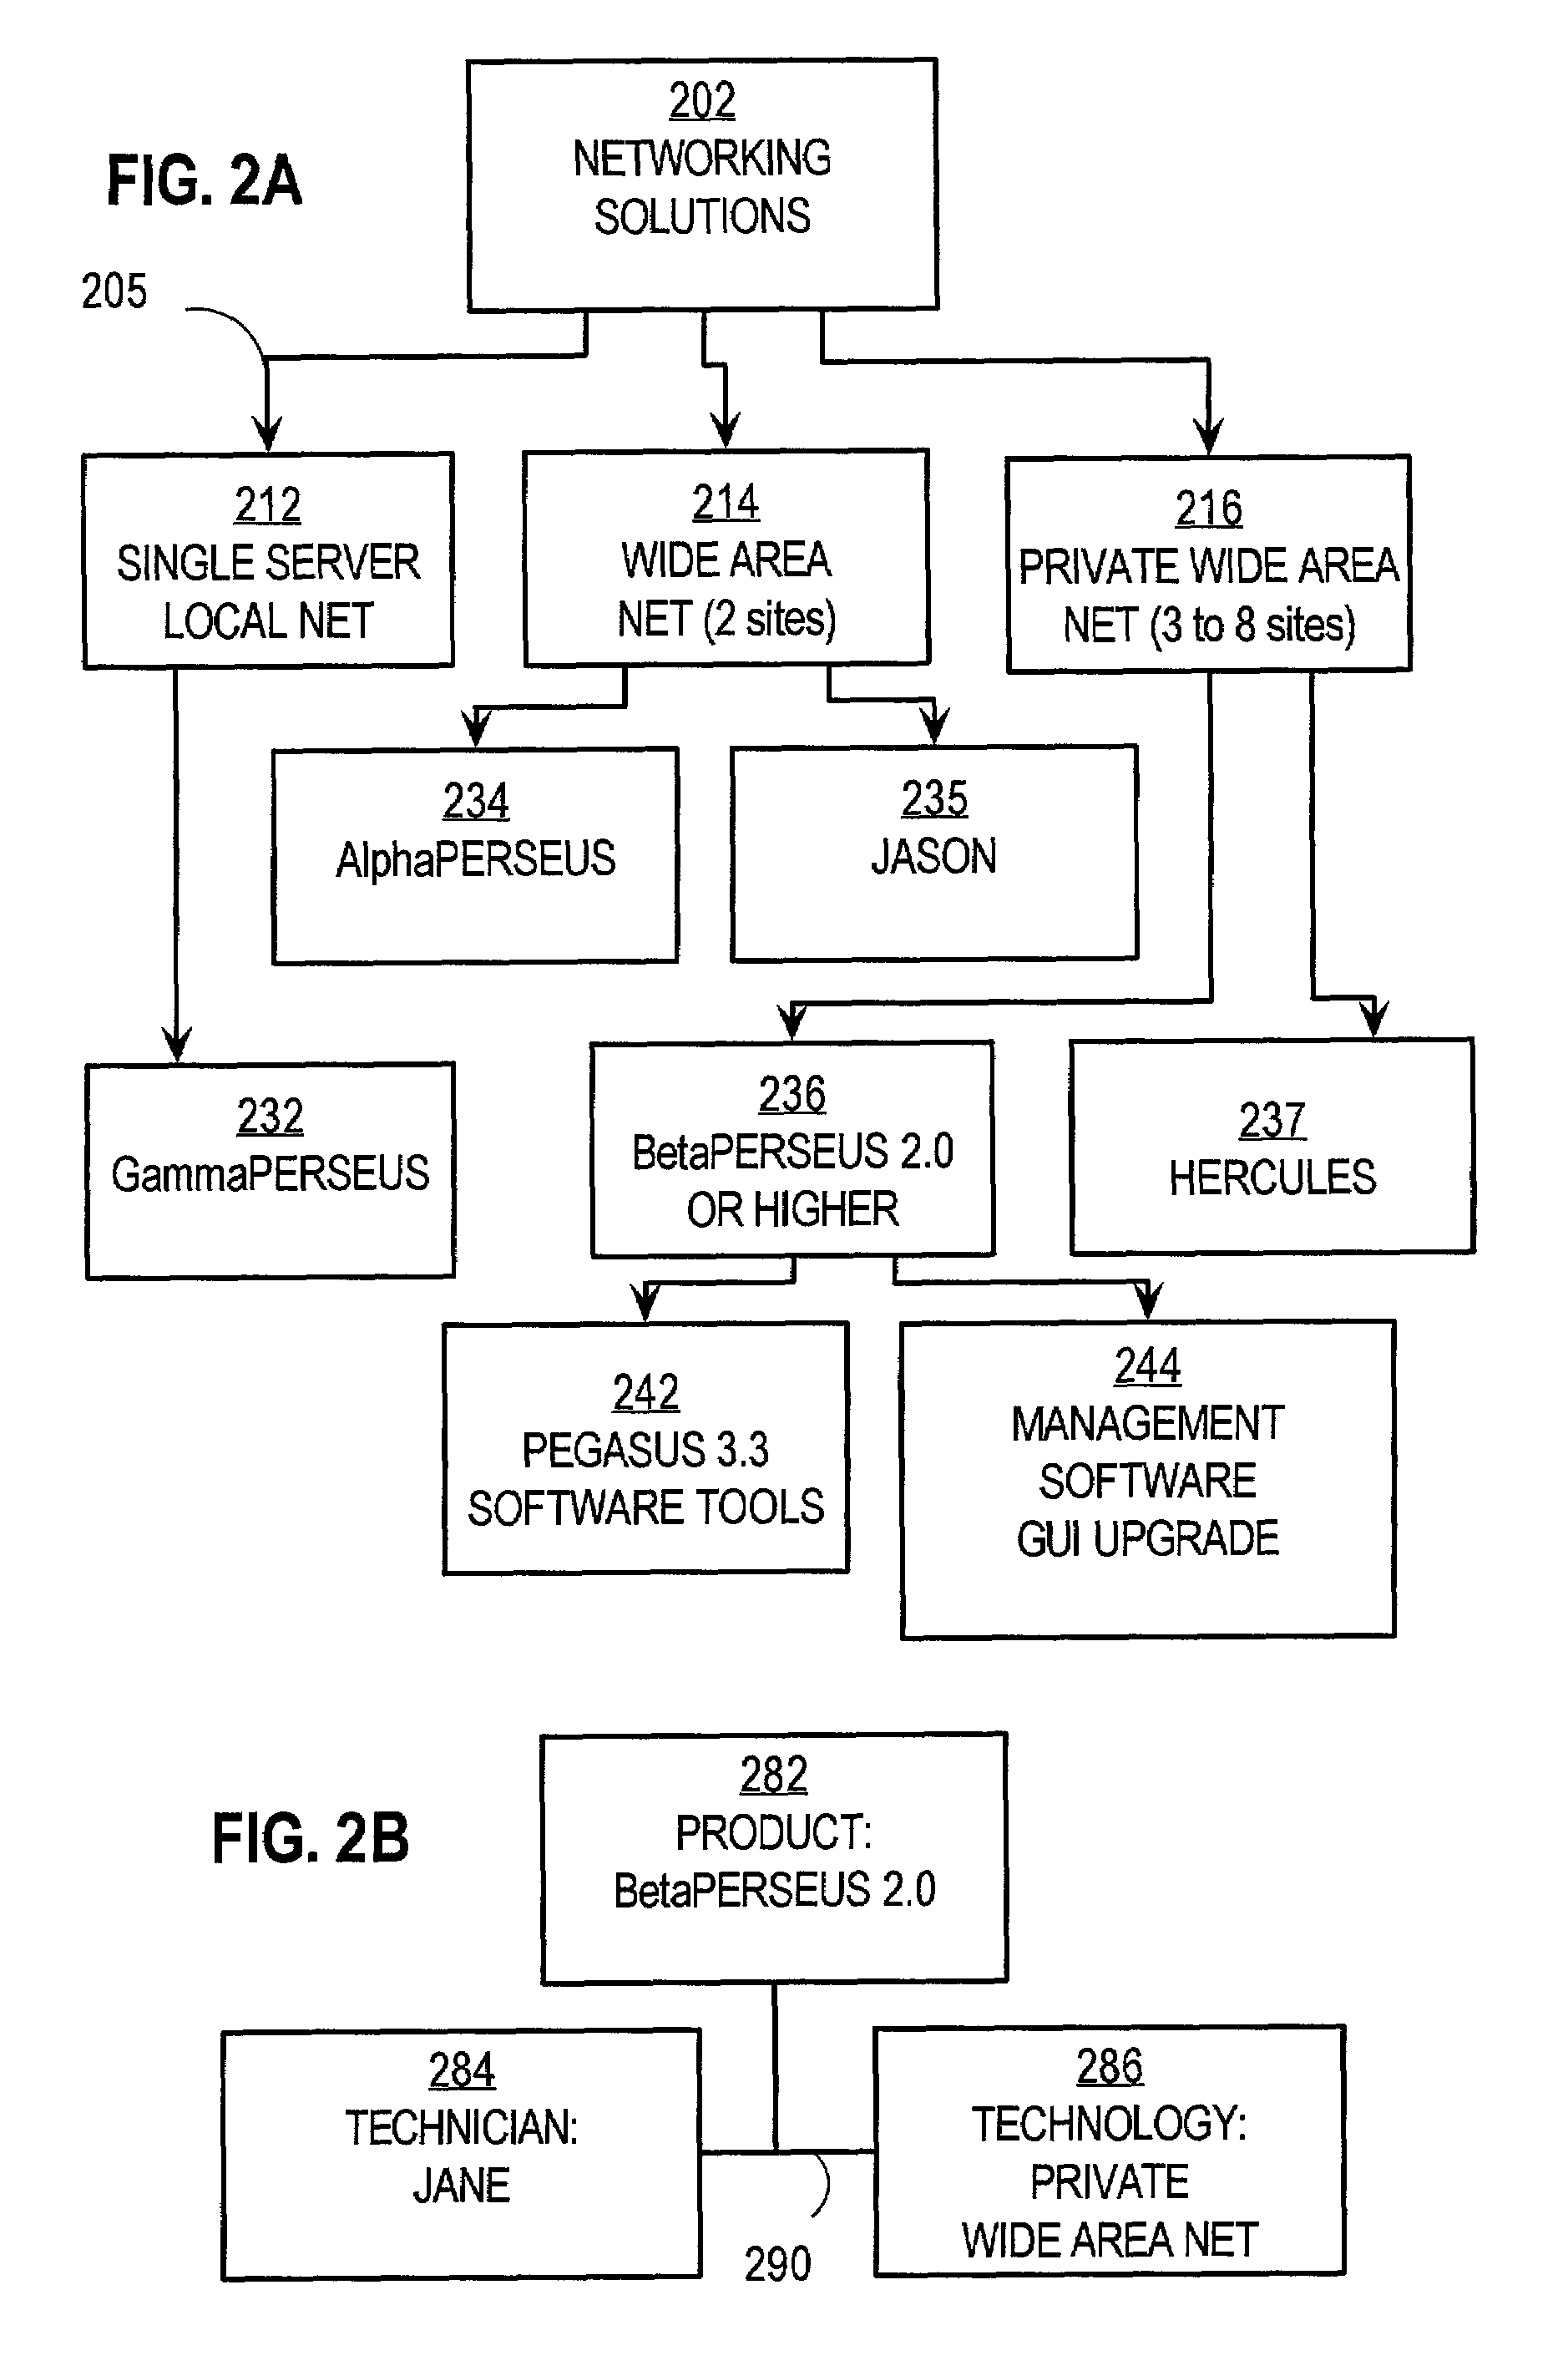 Techniques for forming electronic documents comprising multiple information types